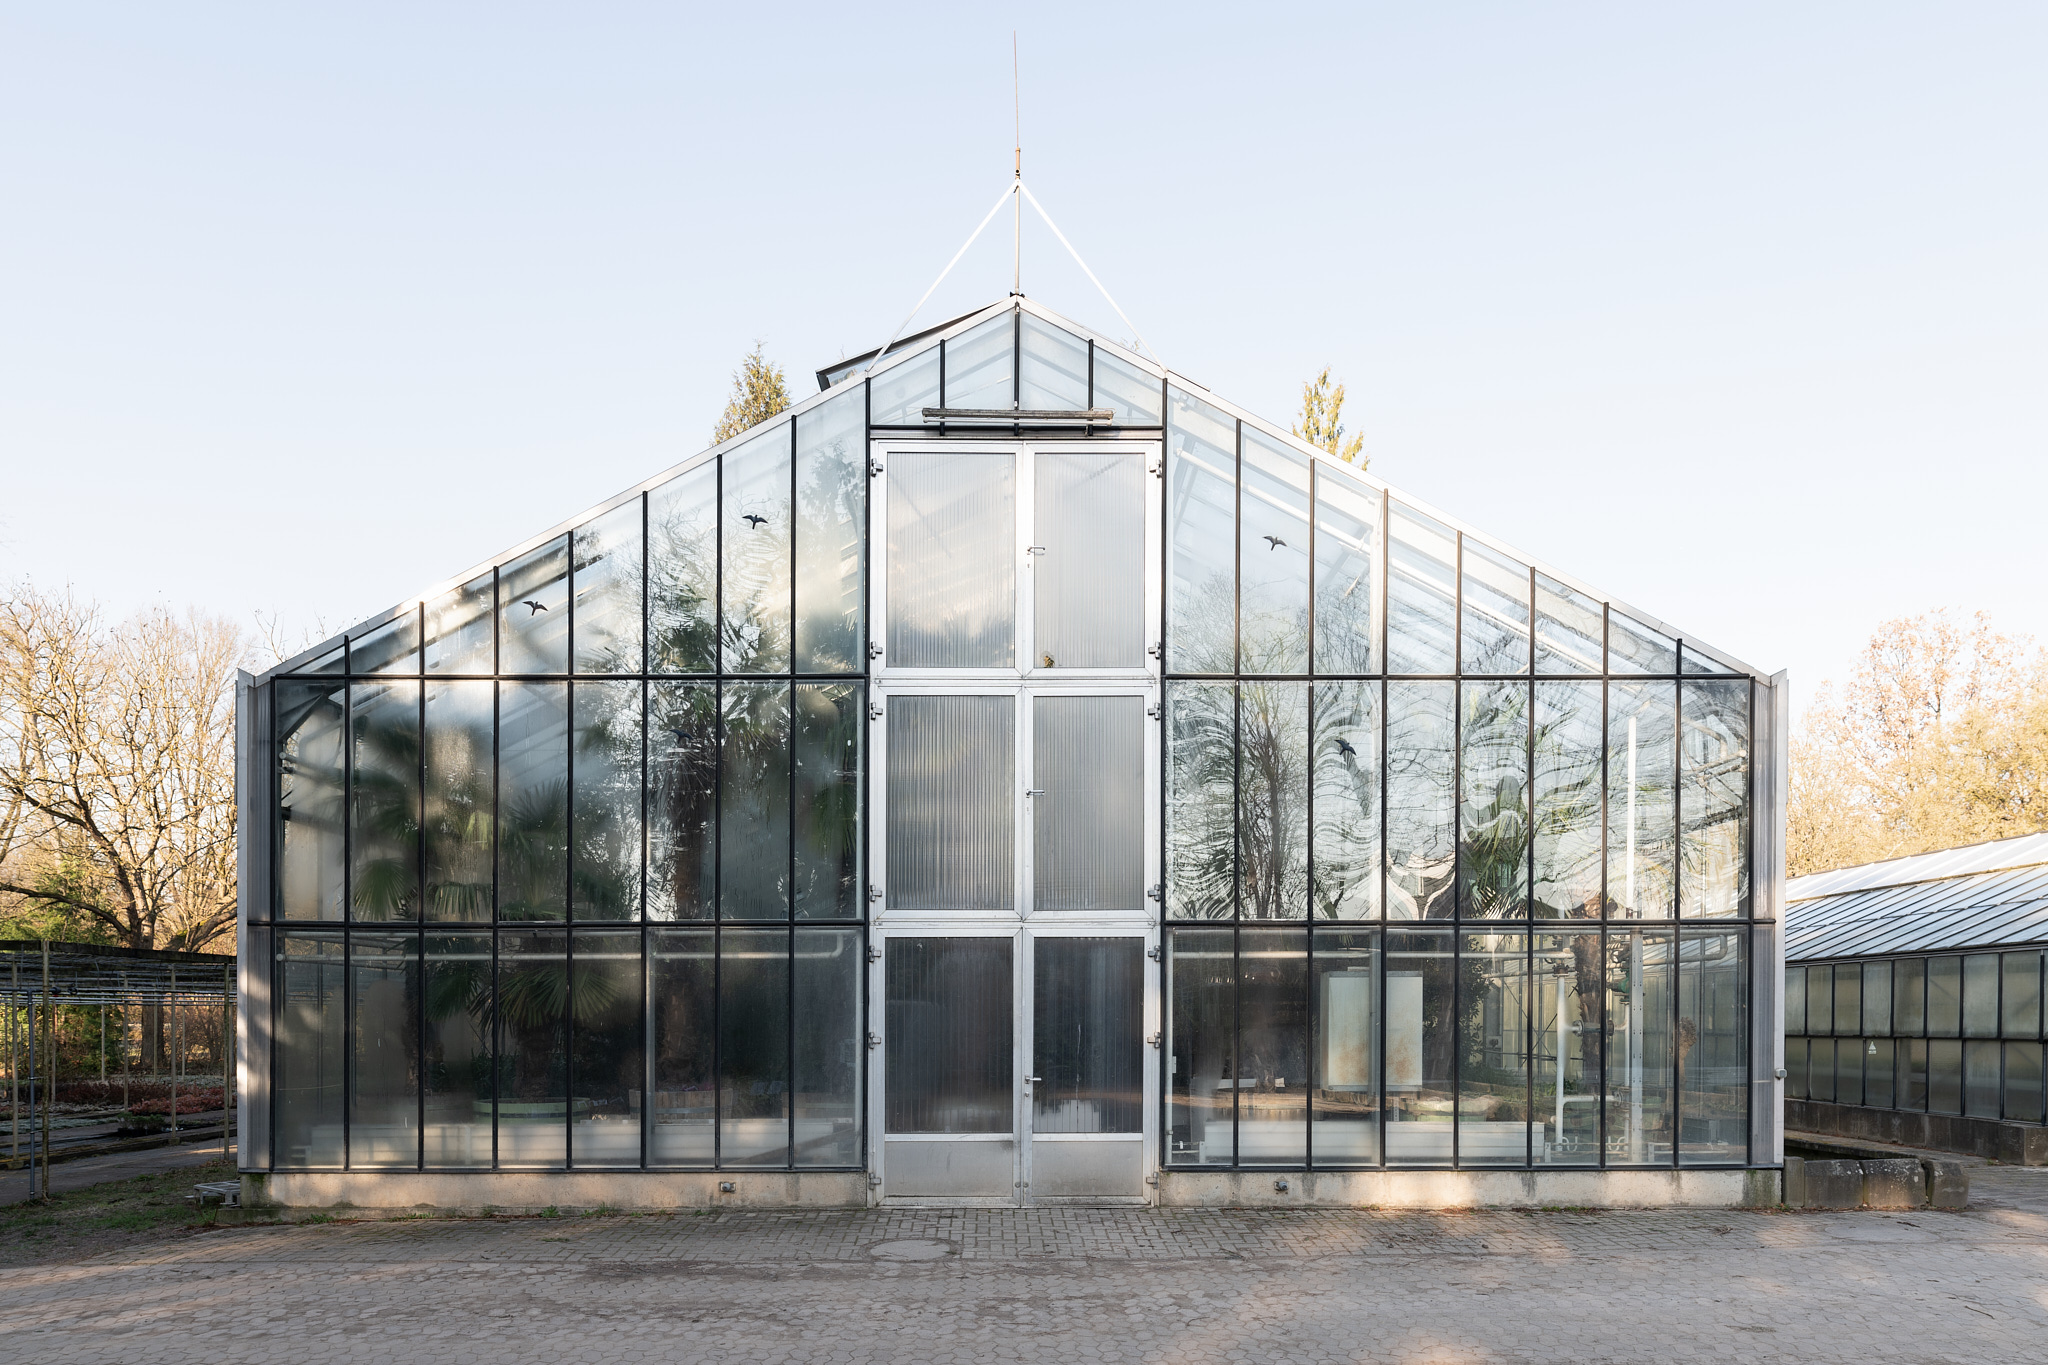 The photo shows the glass front of a greenhouse, behind it blue sky and a few trees. Inside the greenhouse you can see large plants.